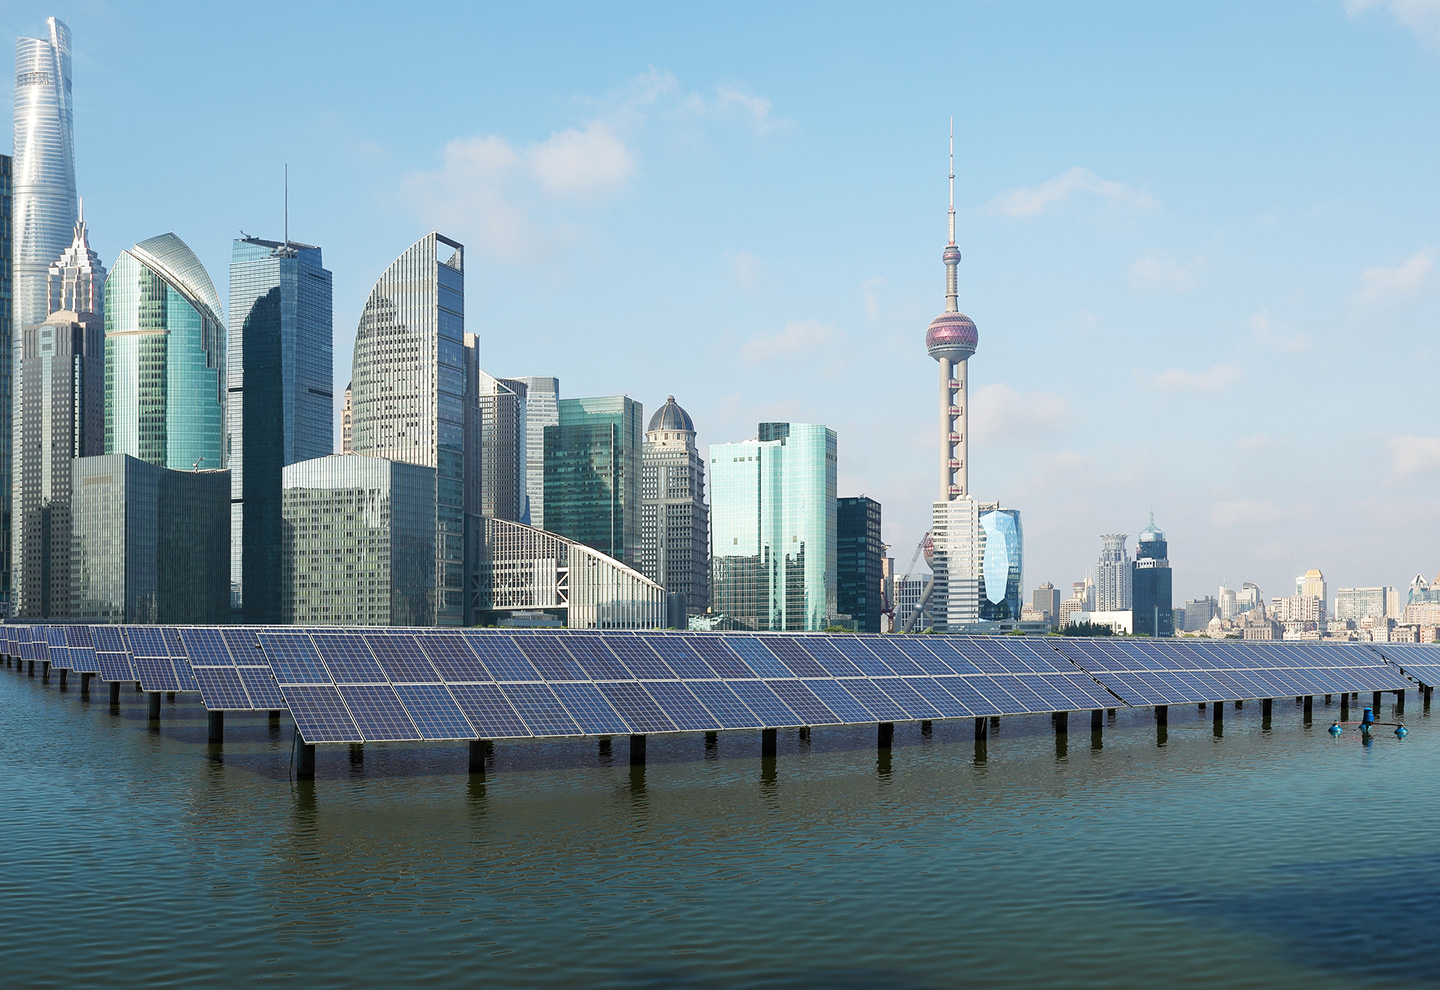 Will 2020 be the year China takes the lead on sustainability?